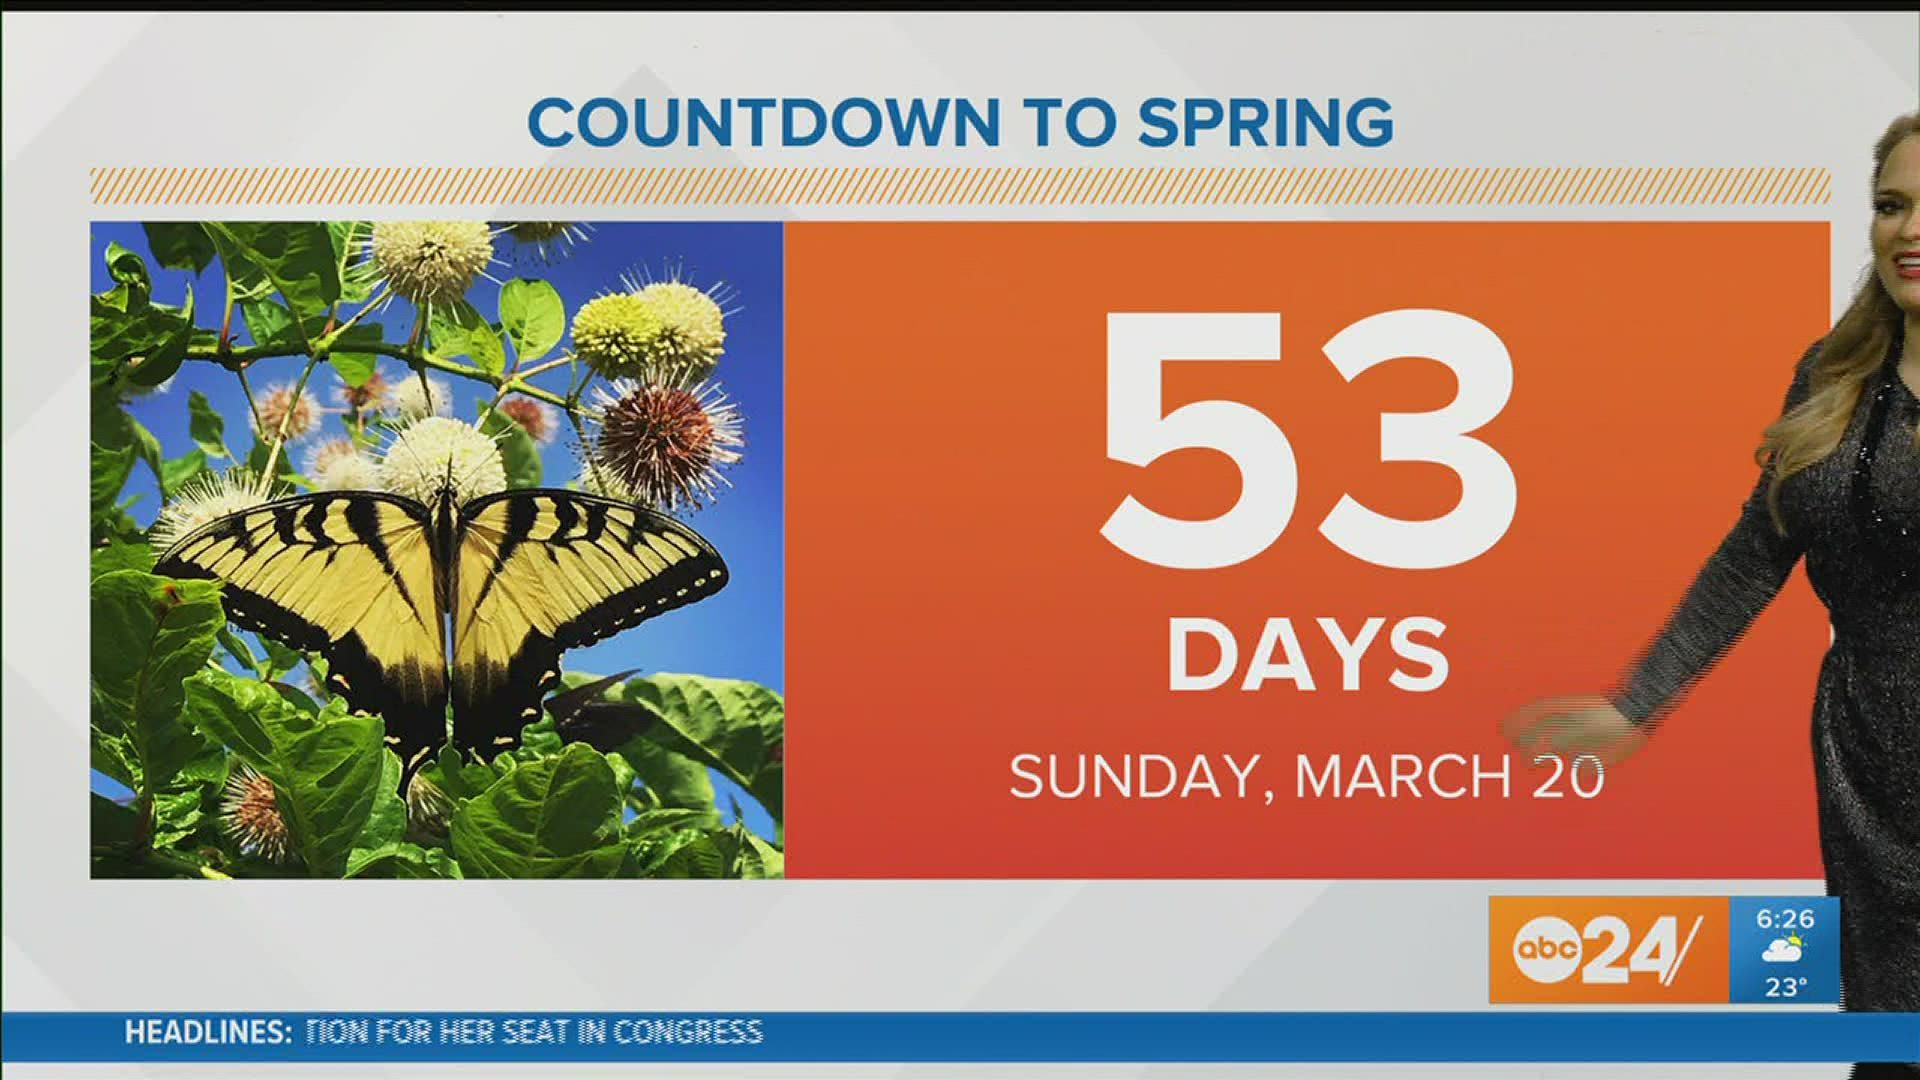 Temperatures remain below average this week but relief is coming this weekend. Remember, only 53 days until Spring!